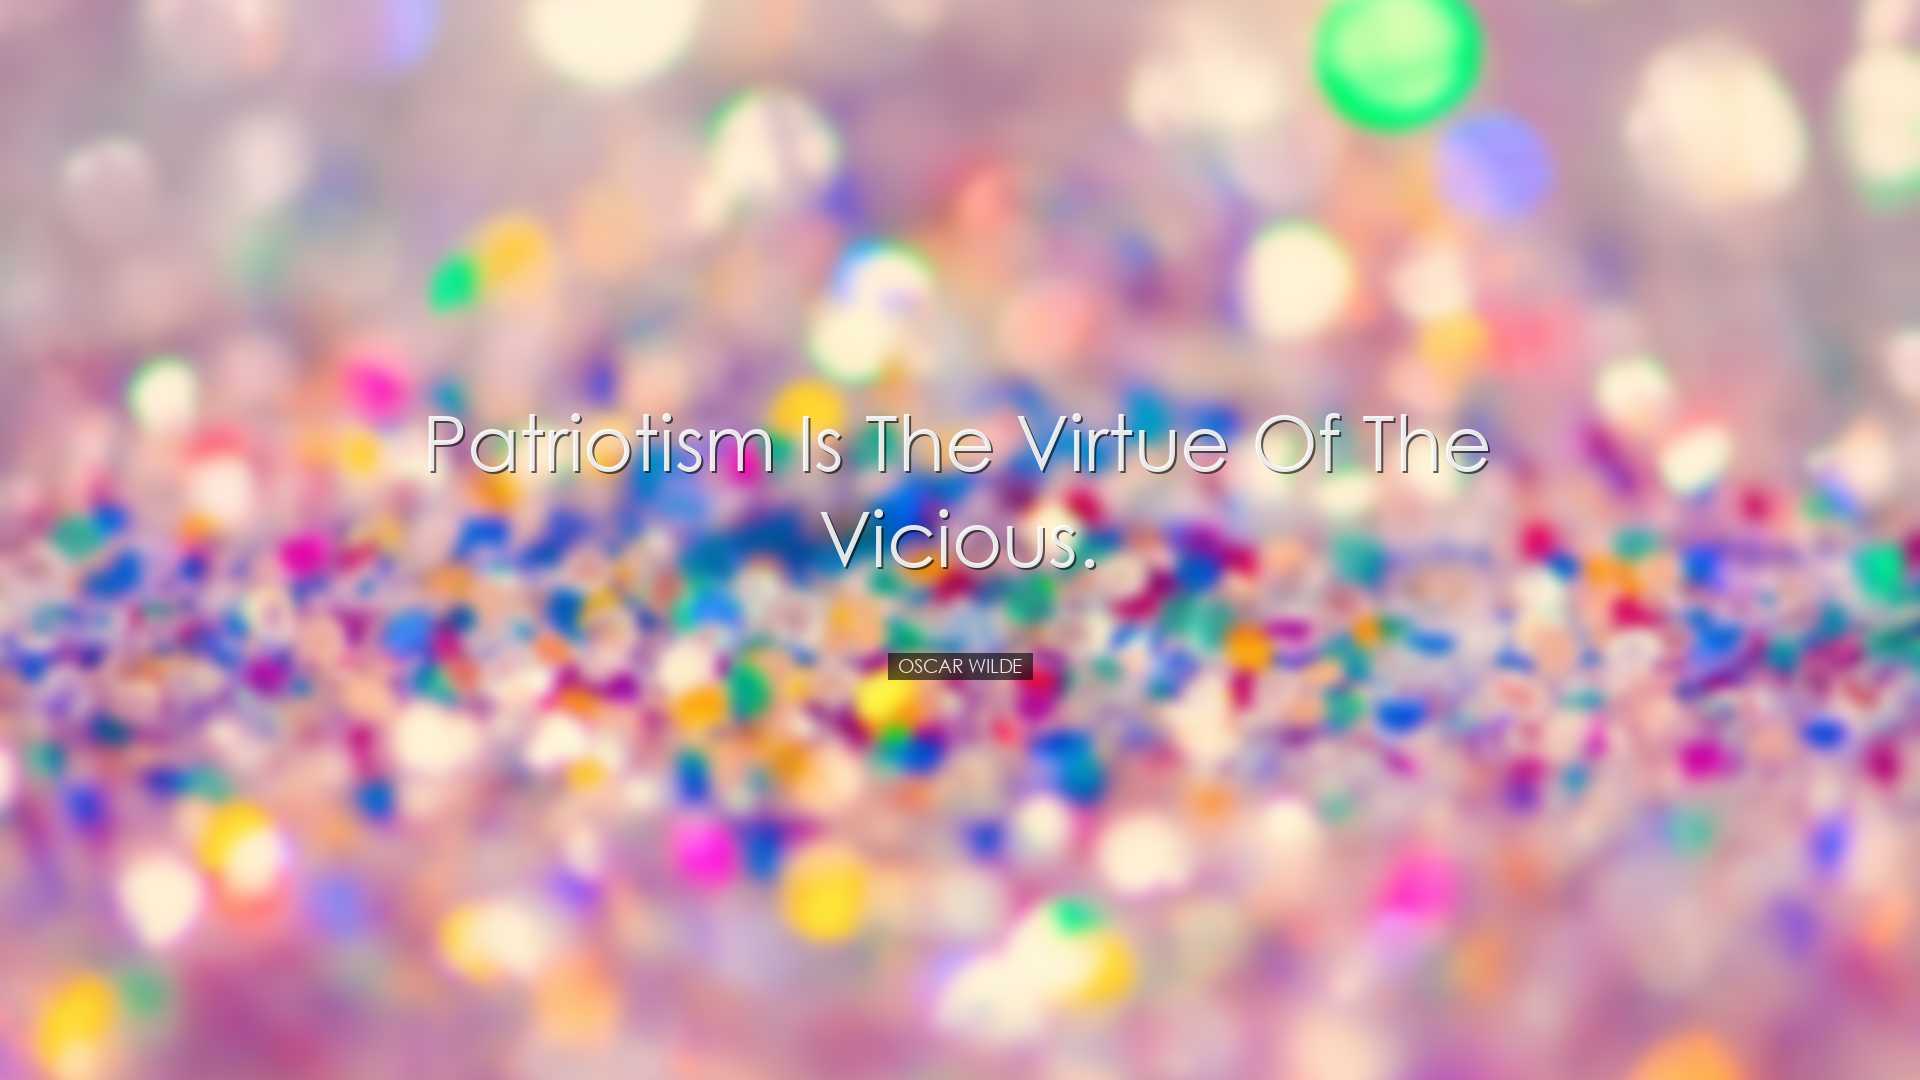 Patriotism is the virtue of the vicious. - Oscar Wilde